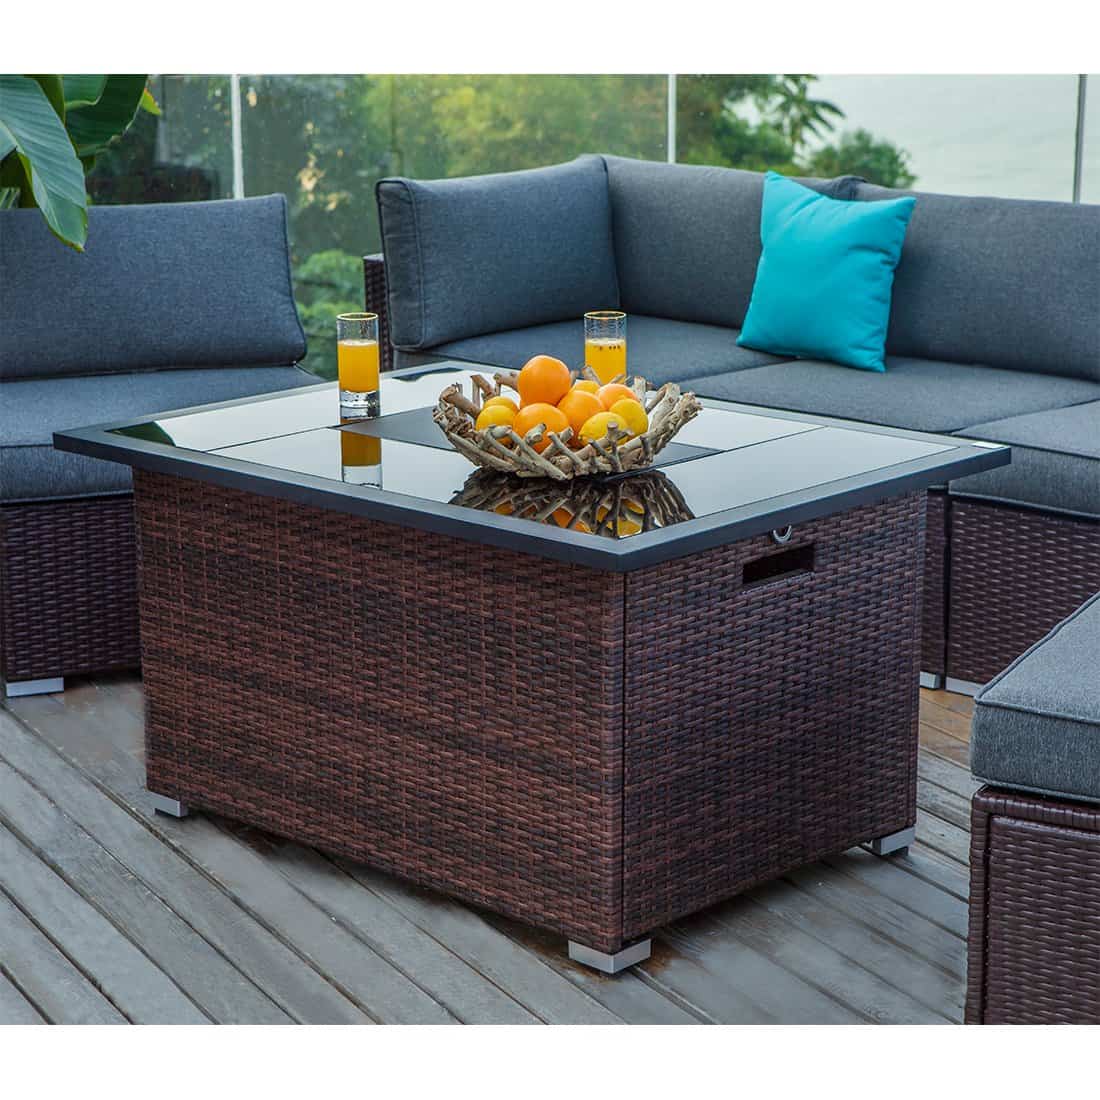 Pristine Wicker Rectangle Fire Pit with Propane Tank Inside